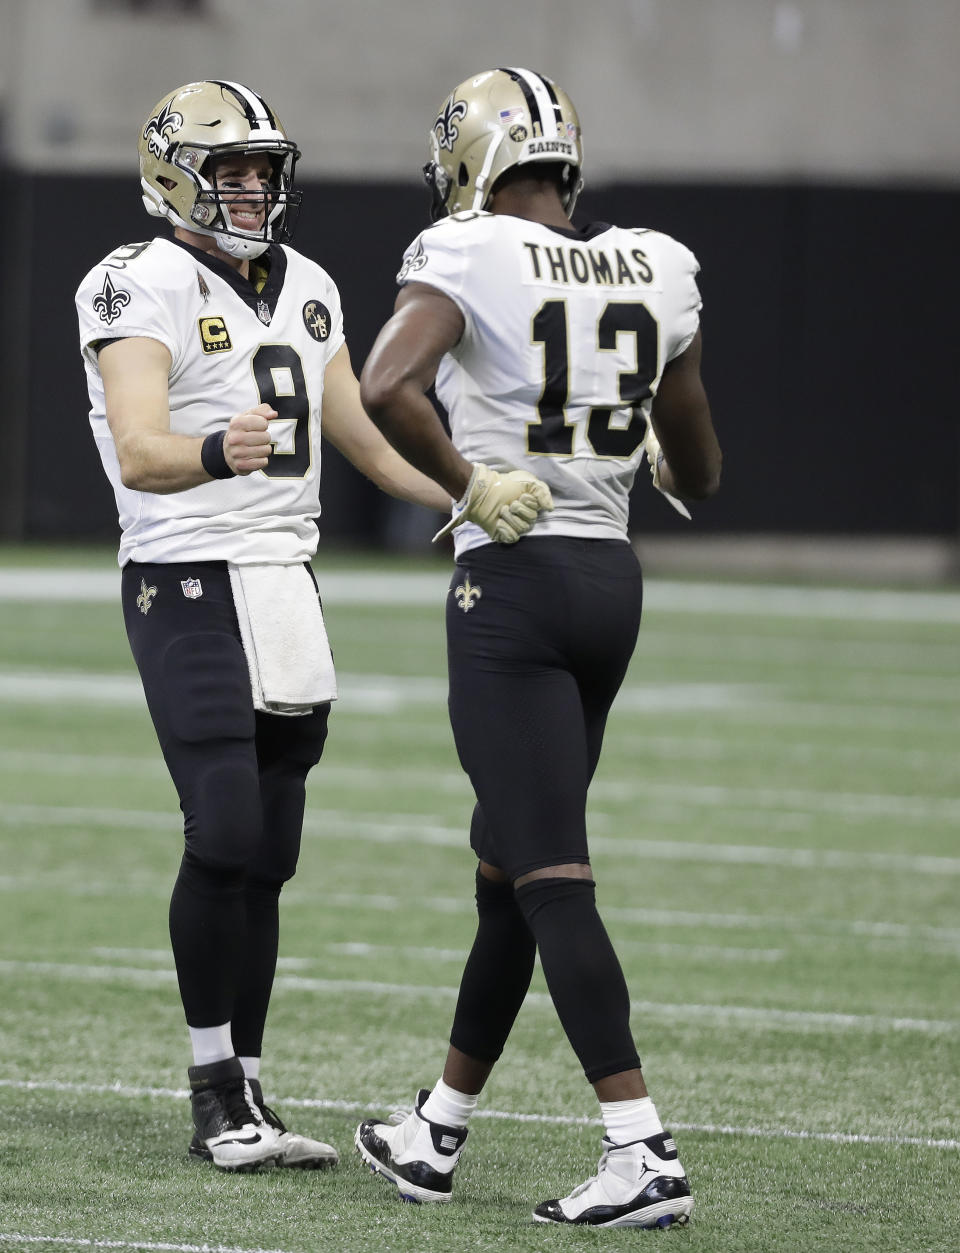 New Orleans Saints quarterback Drew Brees (9) celebrates his pass to New Orleans Saints wide receiver Michael Thomas (13) against the Atlanta Falcons during the first half of an NFL football game, Sunday, Sept. 23, 2018, in Atlanta. Brees' pass competition to Thomas for 17 yards broke Brett Favre's record for most past completions in a career with his 6,301 completion. (AP Photo/Mark Humphrey)